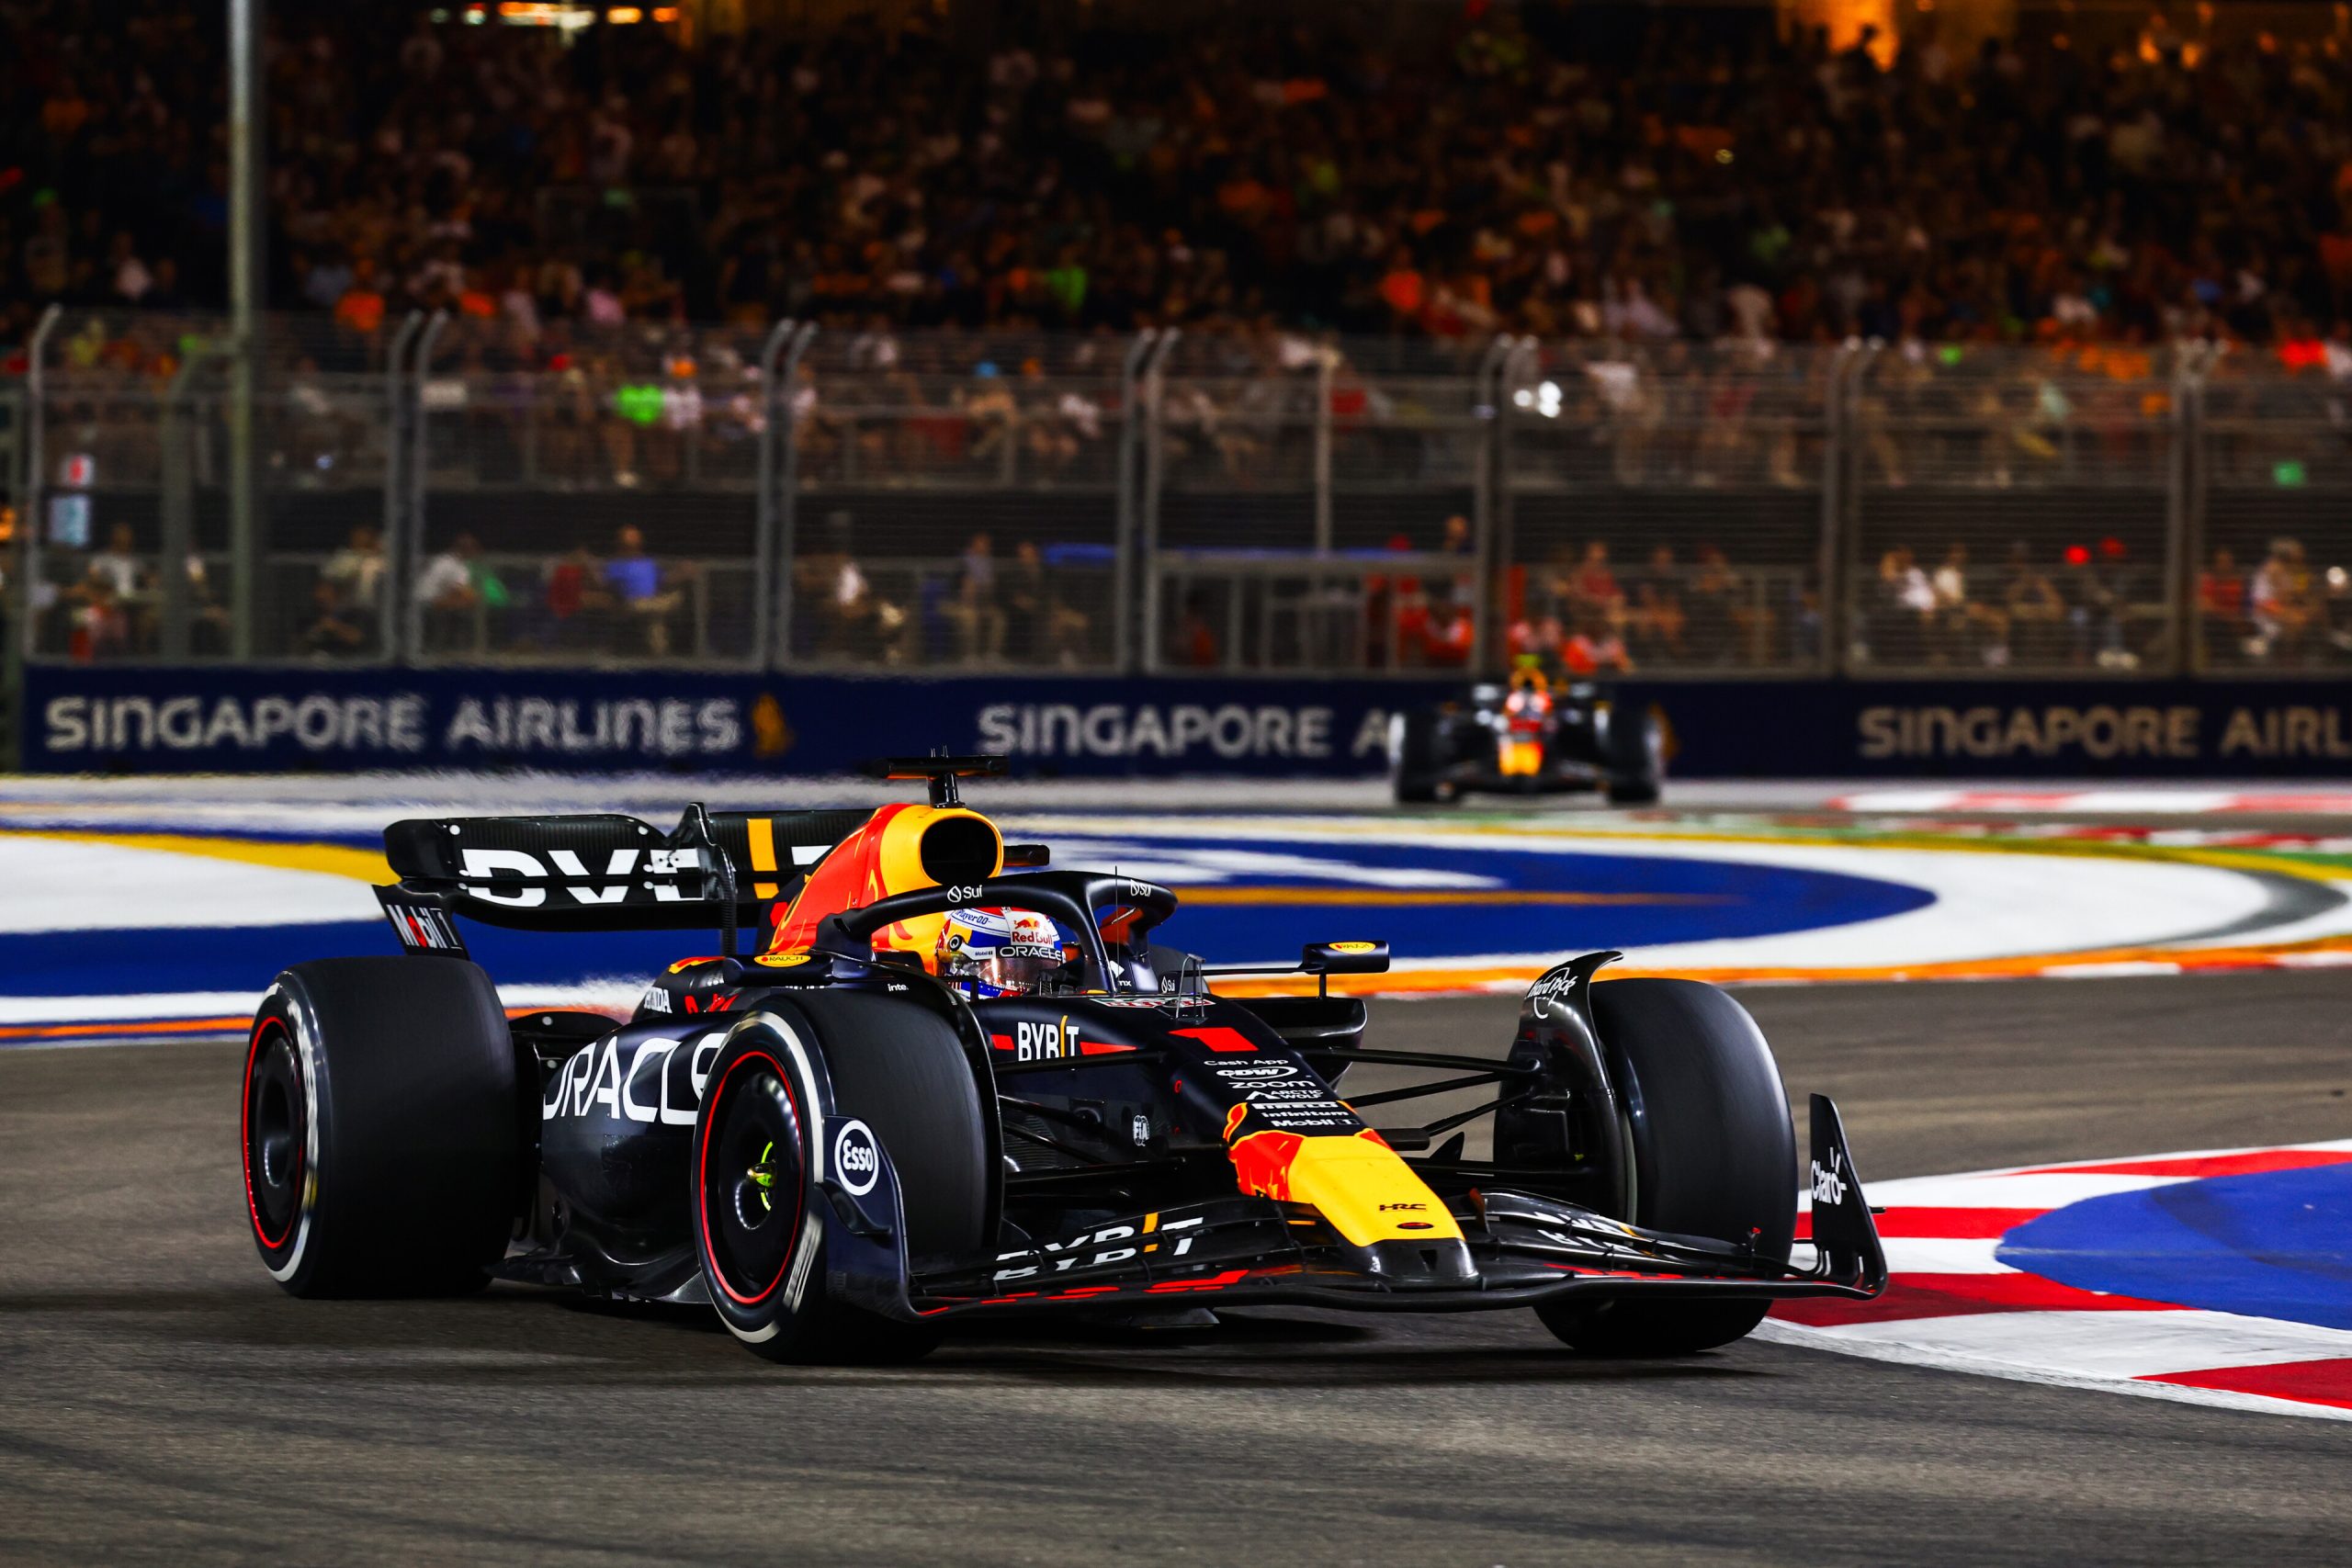 Max Verstappen and Sergio Perez for Red Bull Racing at the Singapore GP